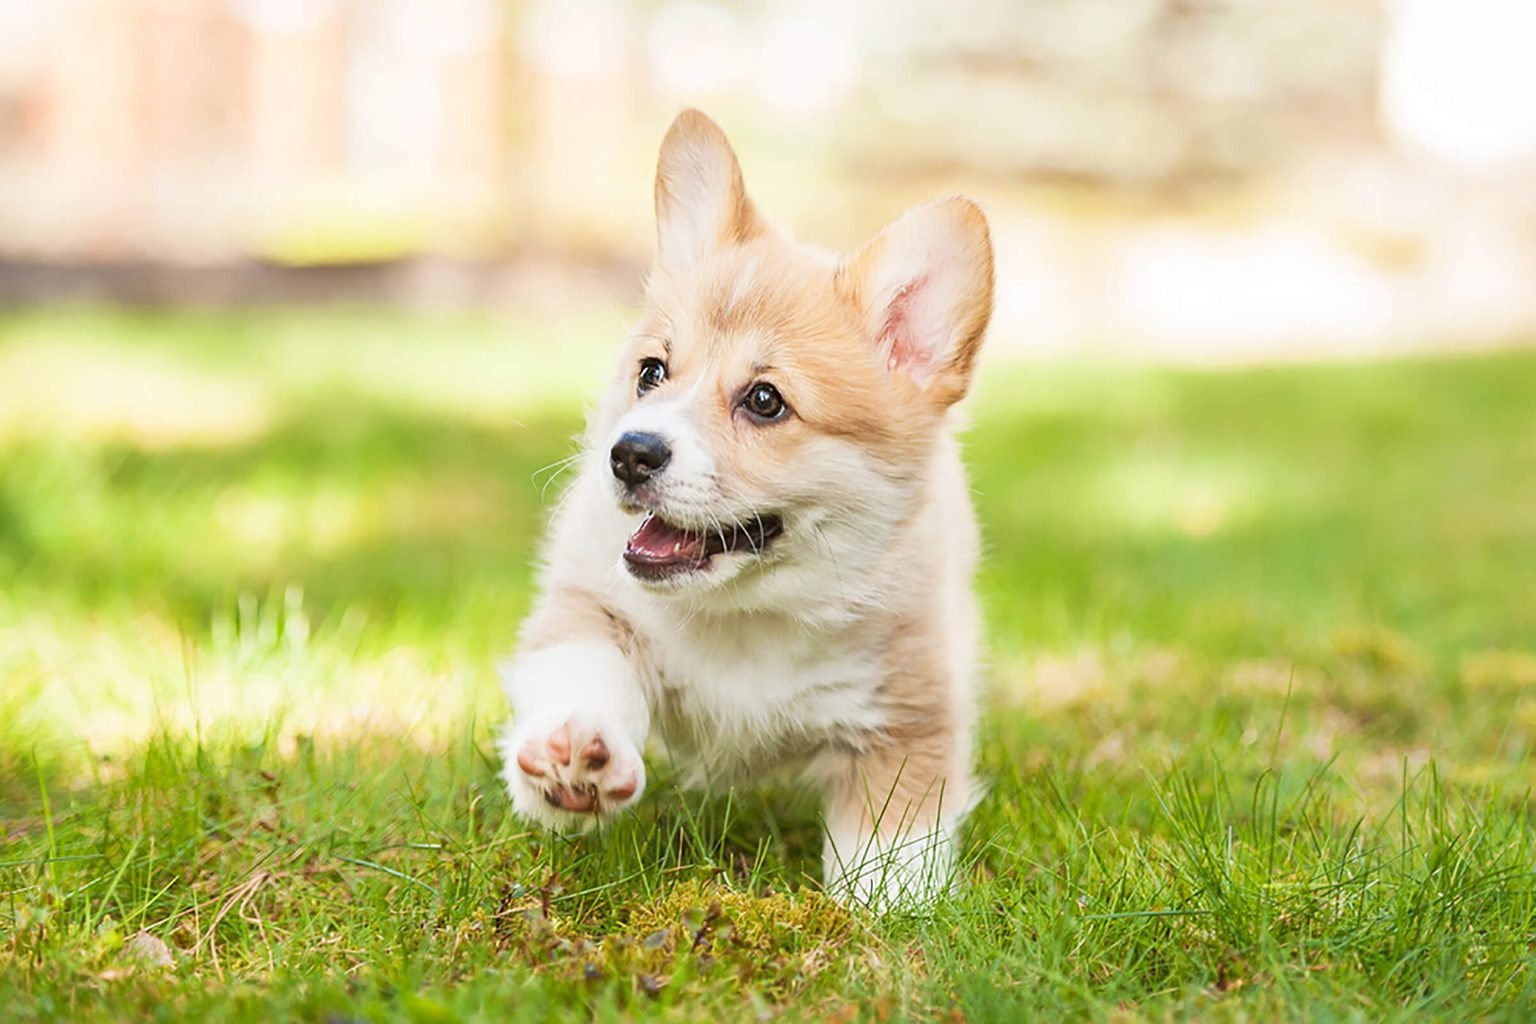 Can You Pass This General Knowledge Quiz While Being Distracted by Cute Puppies? Cute Dog Welsh Corgi Puppy